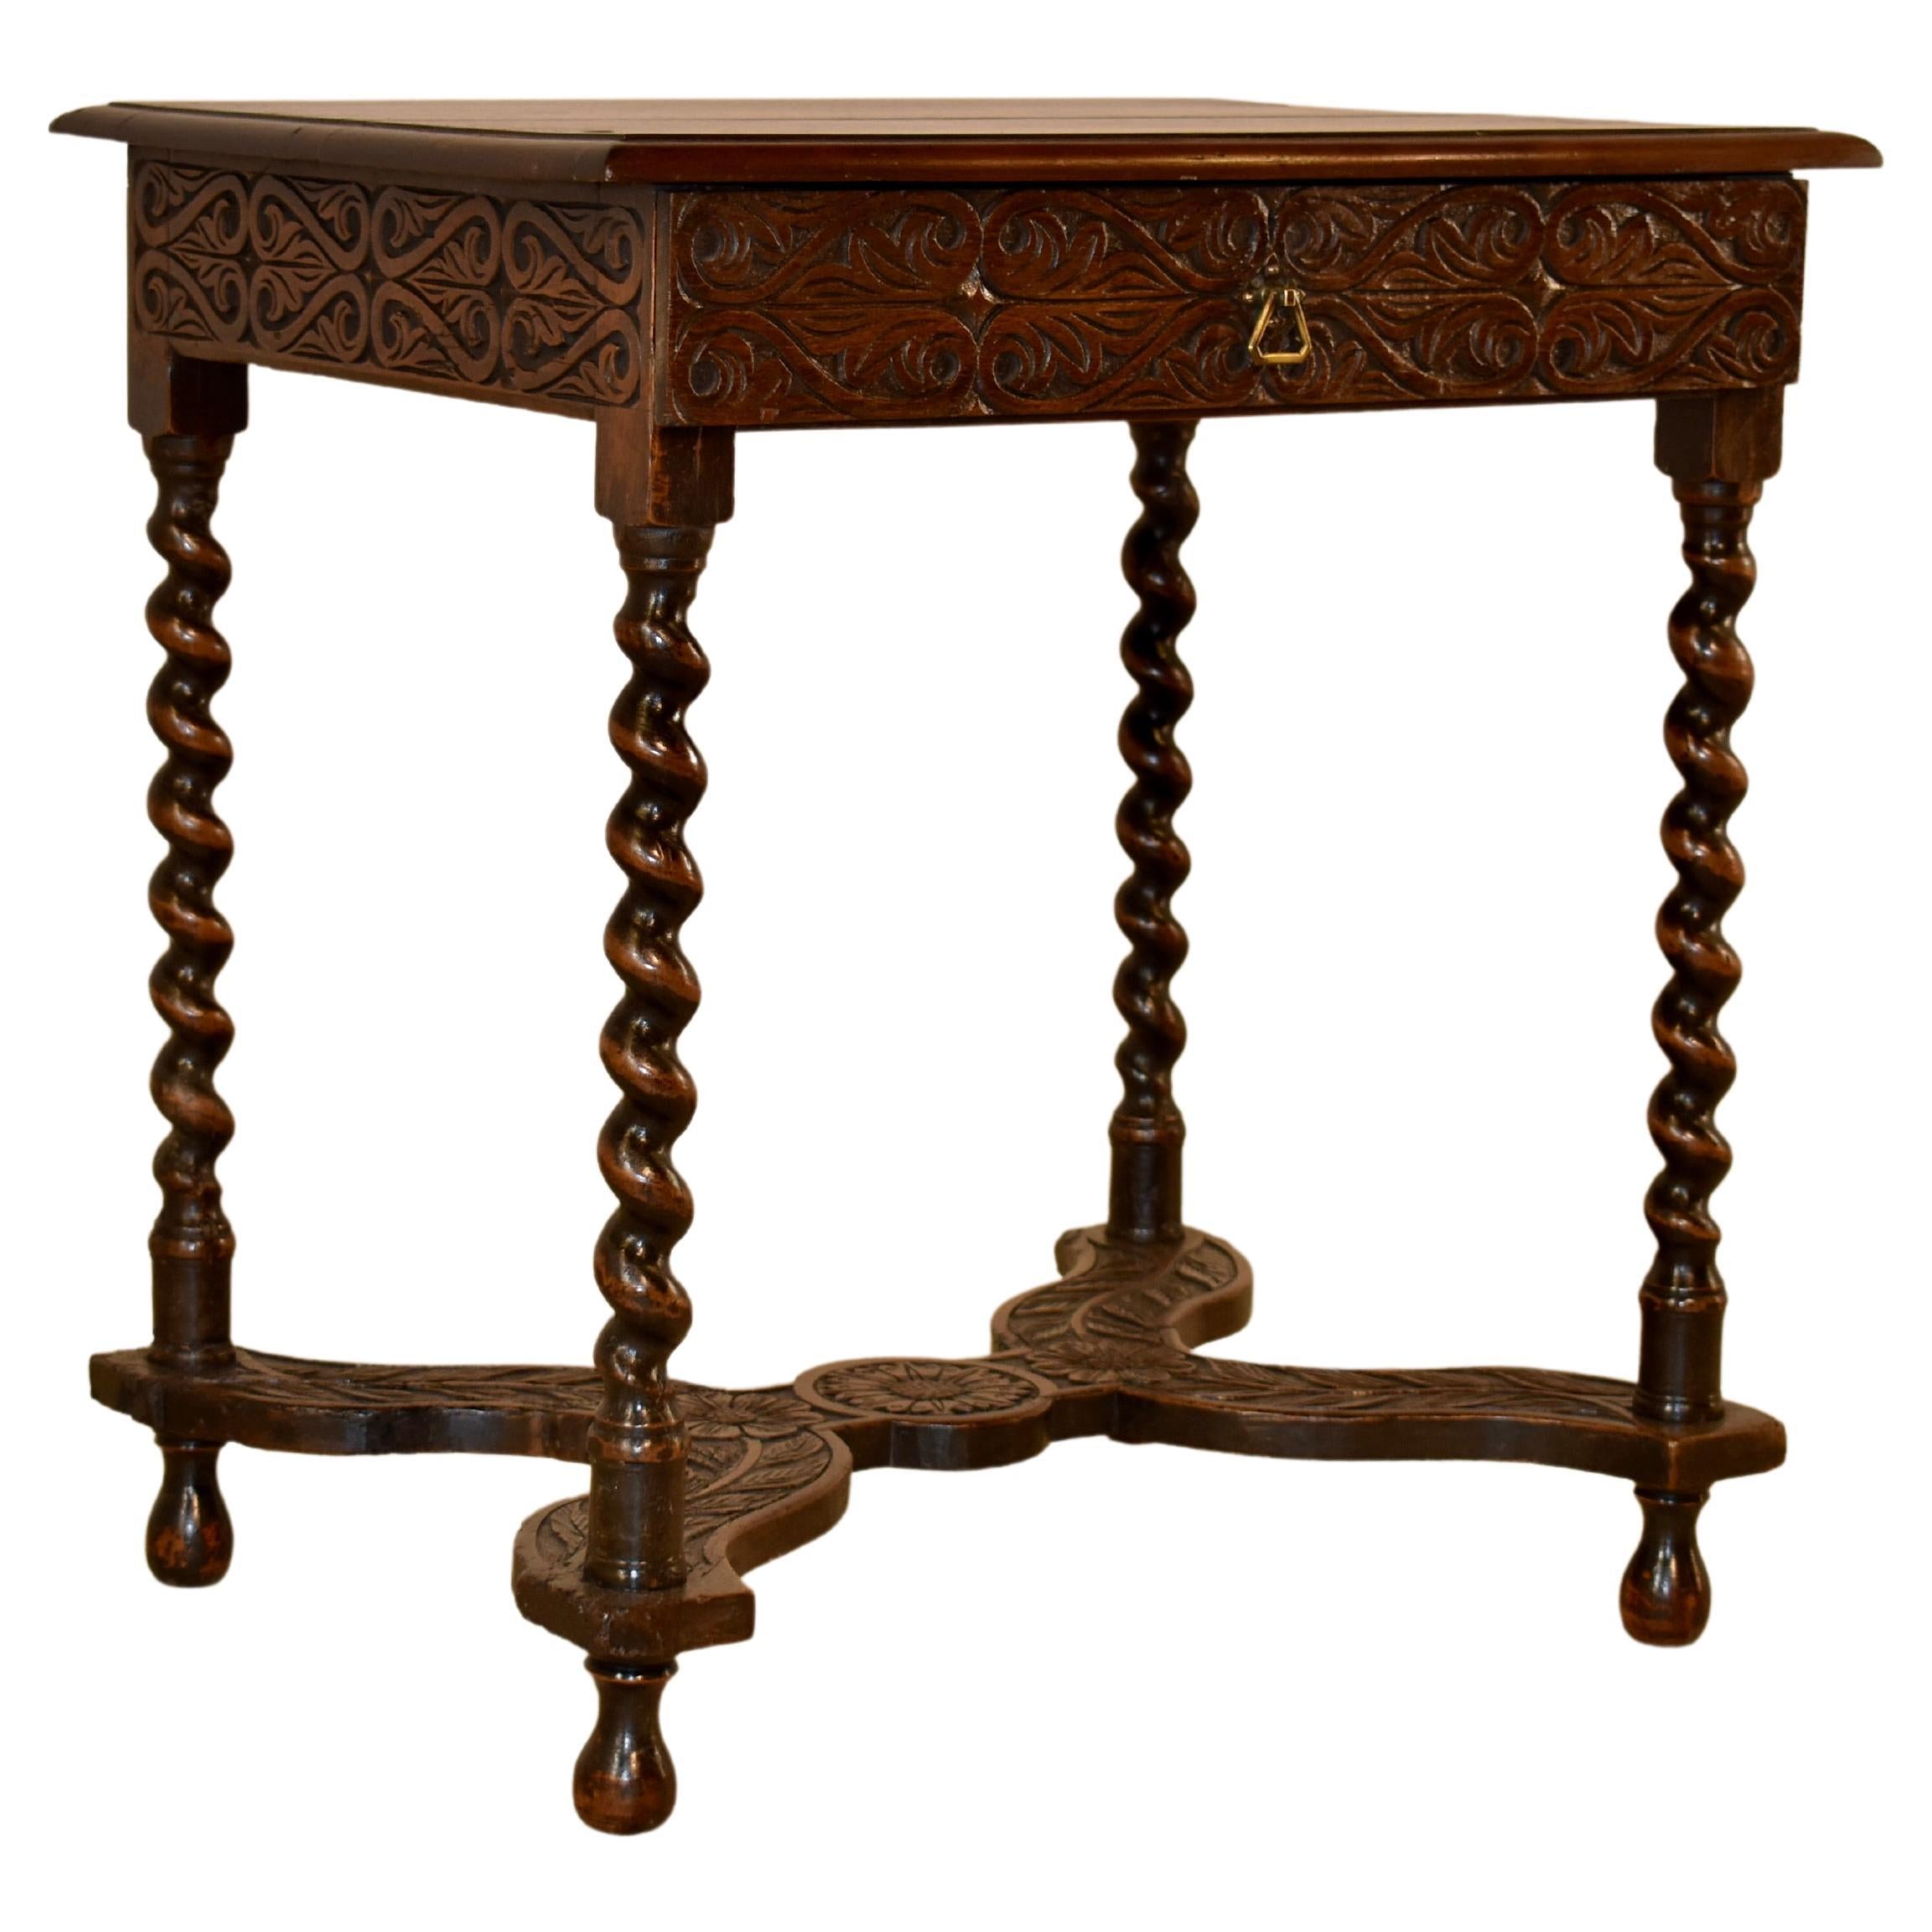 Louis XV period 18th century walnut side table from France. The top is made from two planks, with a beveled edge and pegged construction. The top follows down to hand carved decorated aprons, and a single drawer in the front. The table is supported